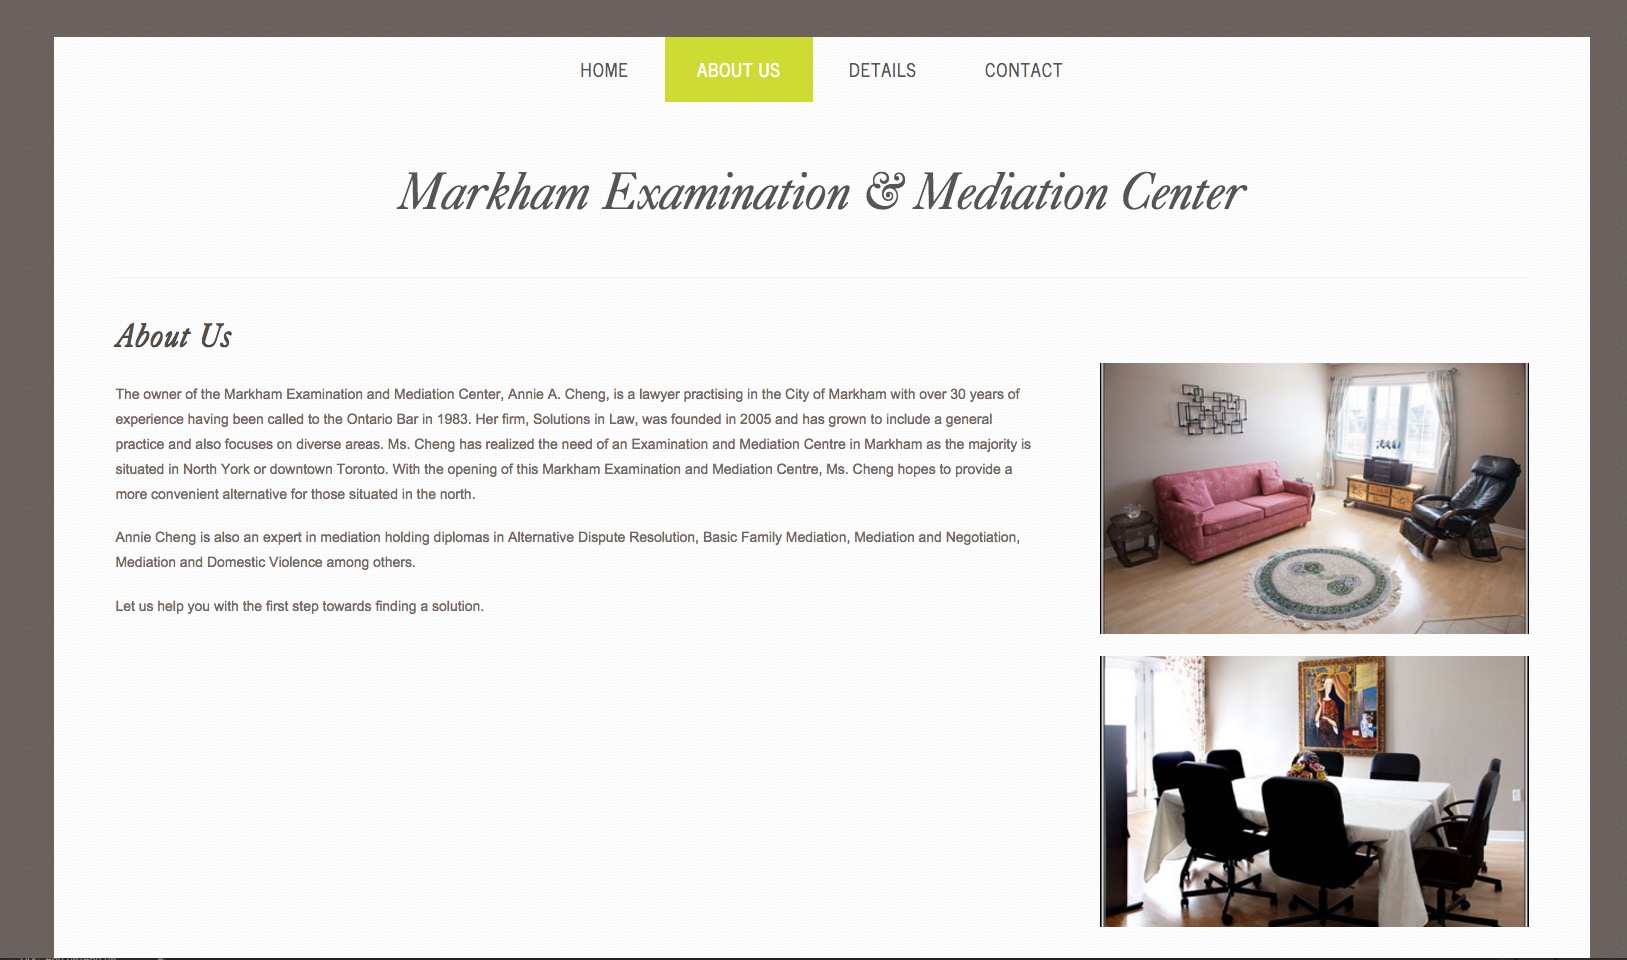 Solution in Law Microsite